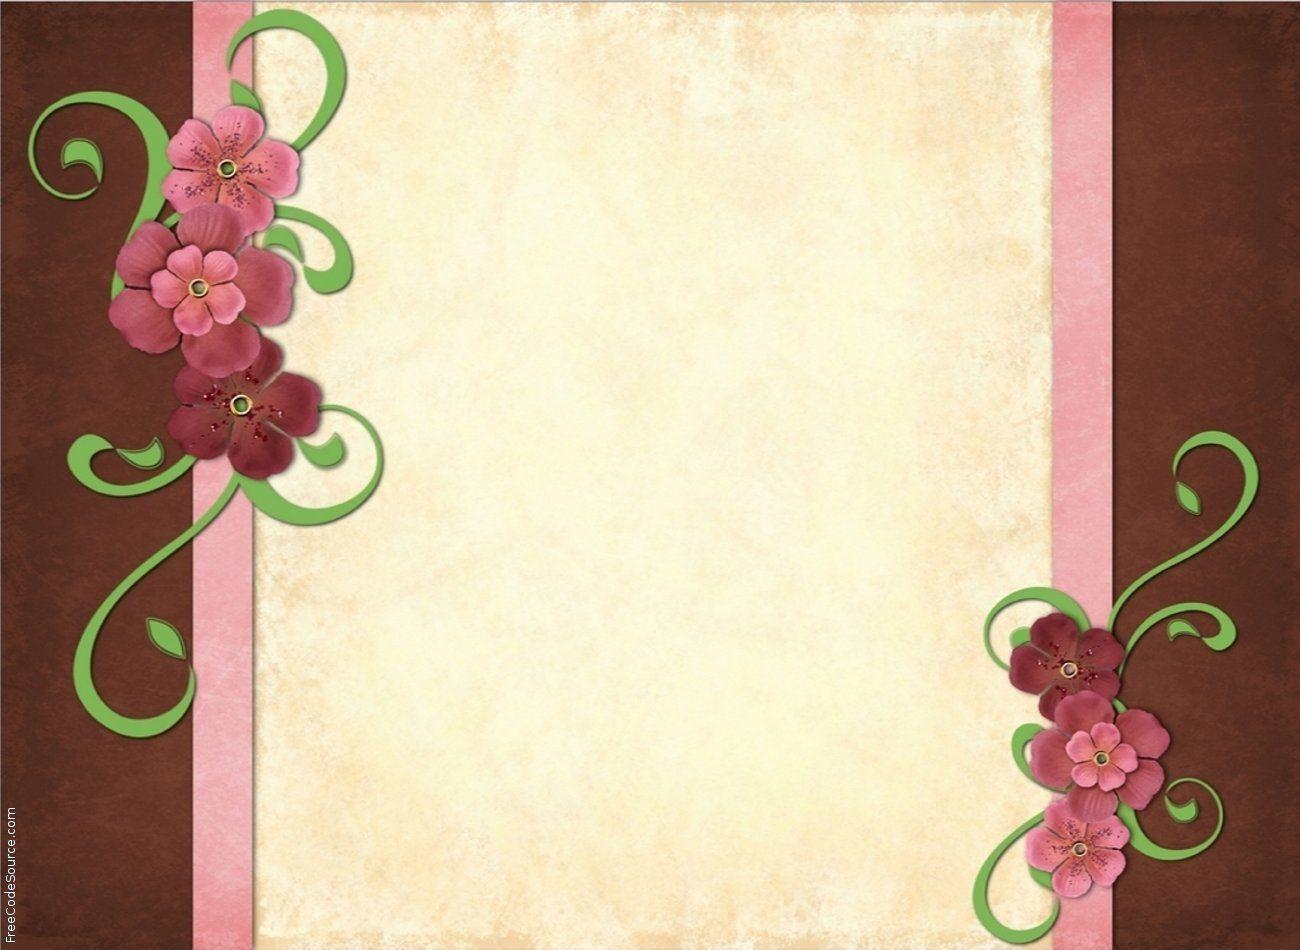 Pretty Flowers Formspring Background, Pretty Flowers Formspring